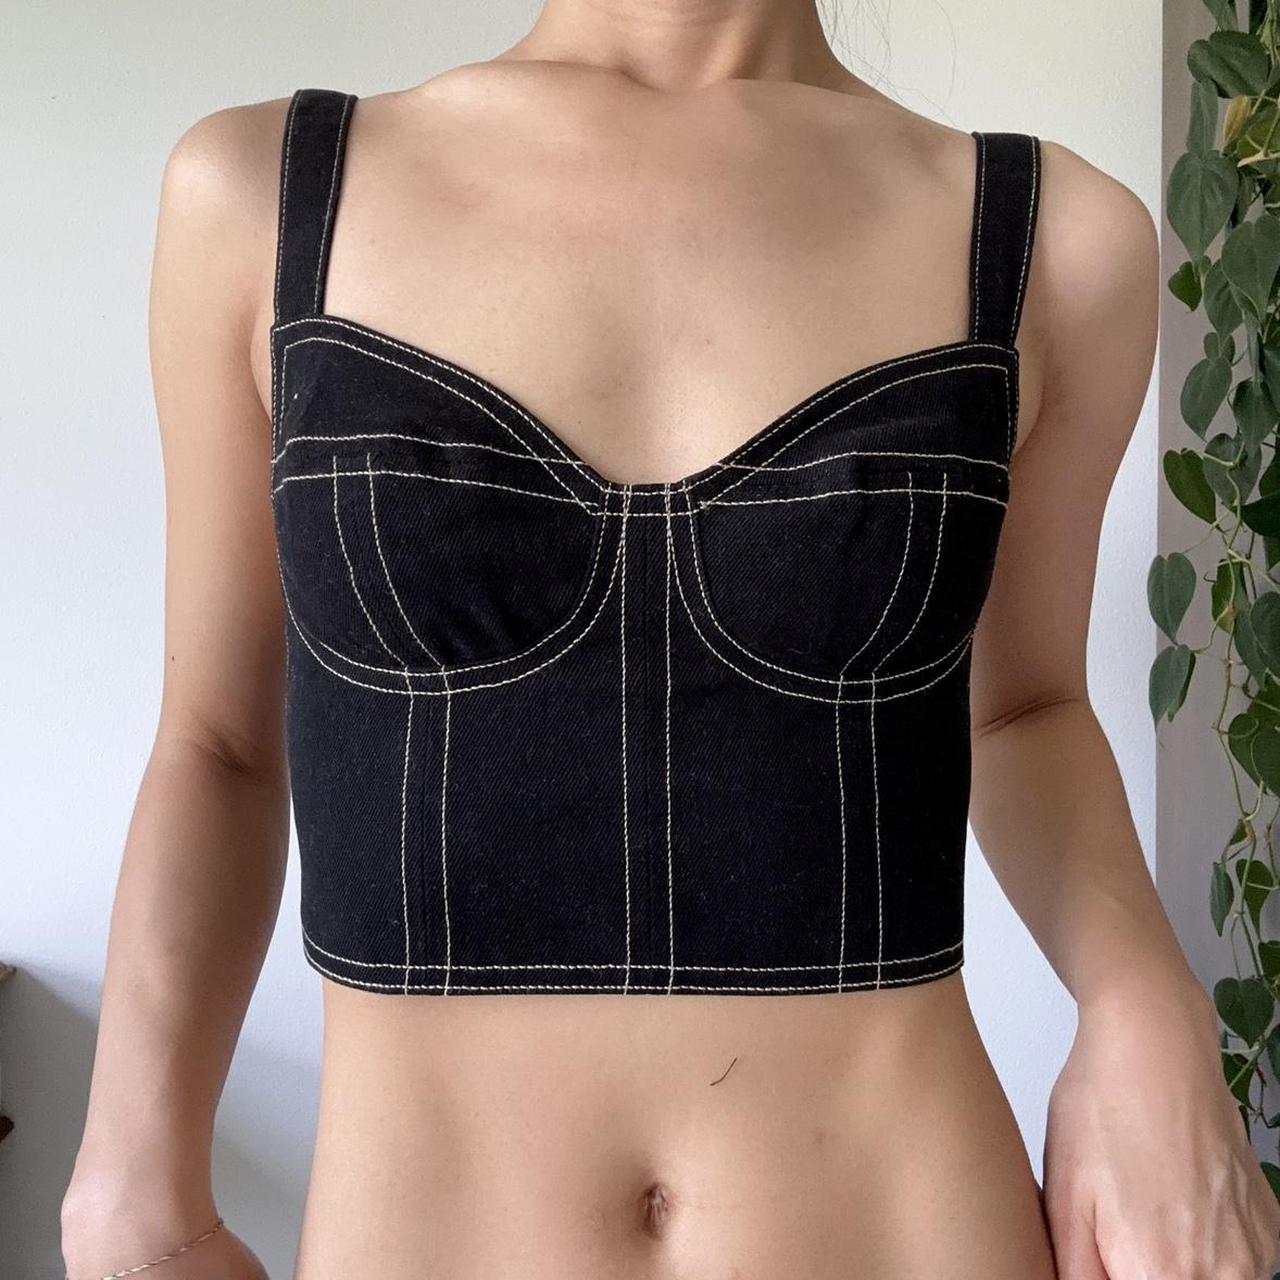 Are you am I Skia Denim Bustier Corset Top By - Depop